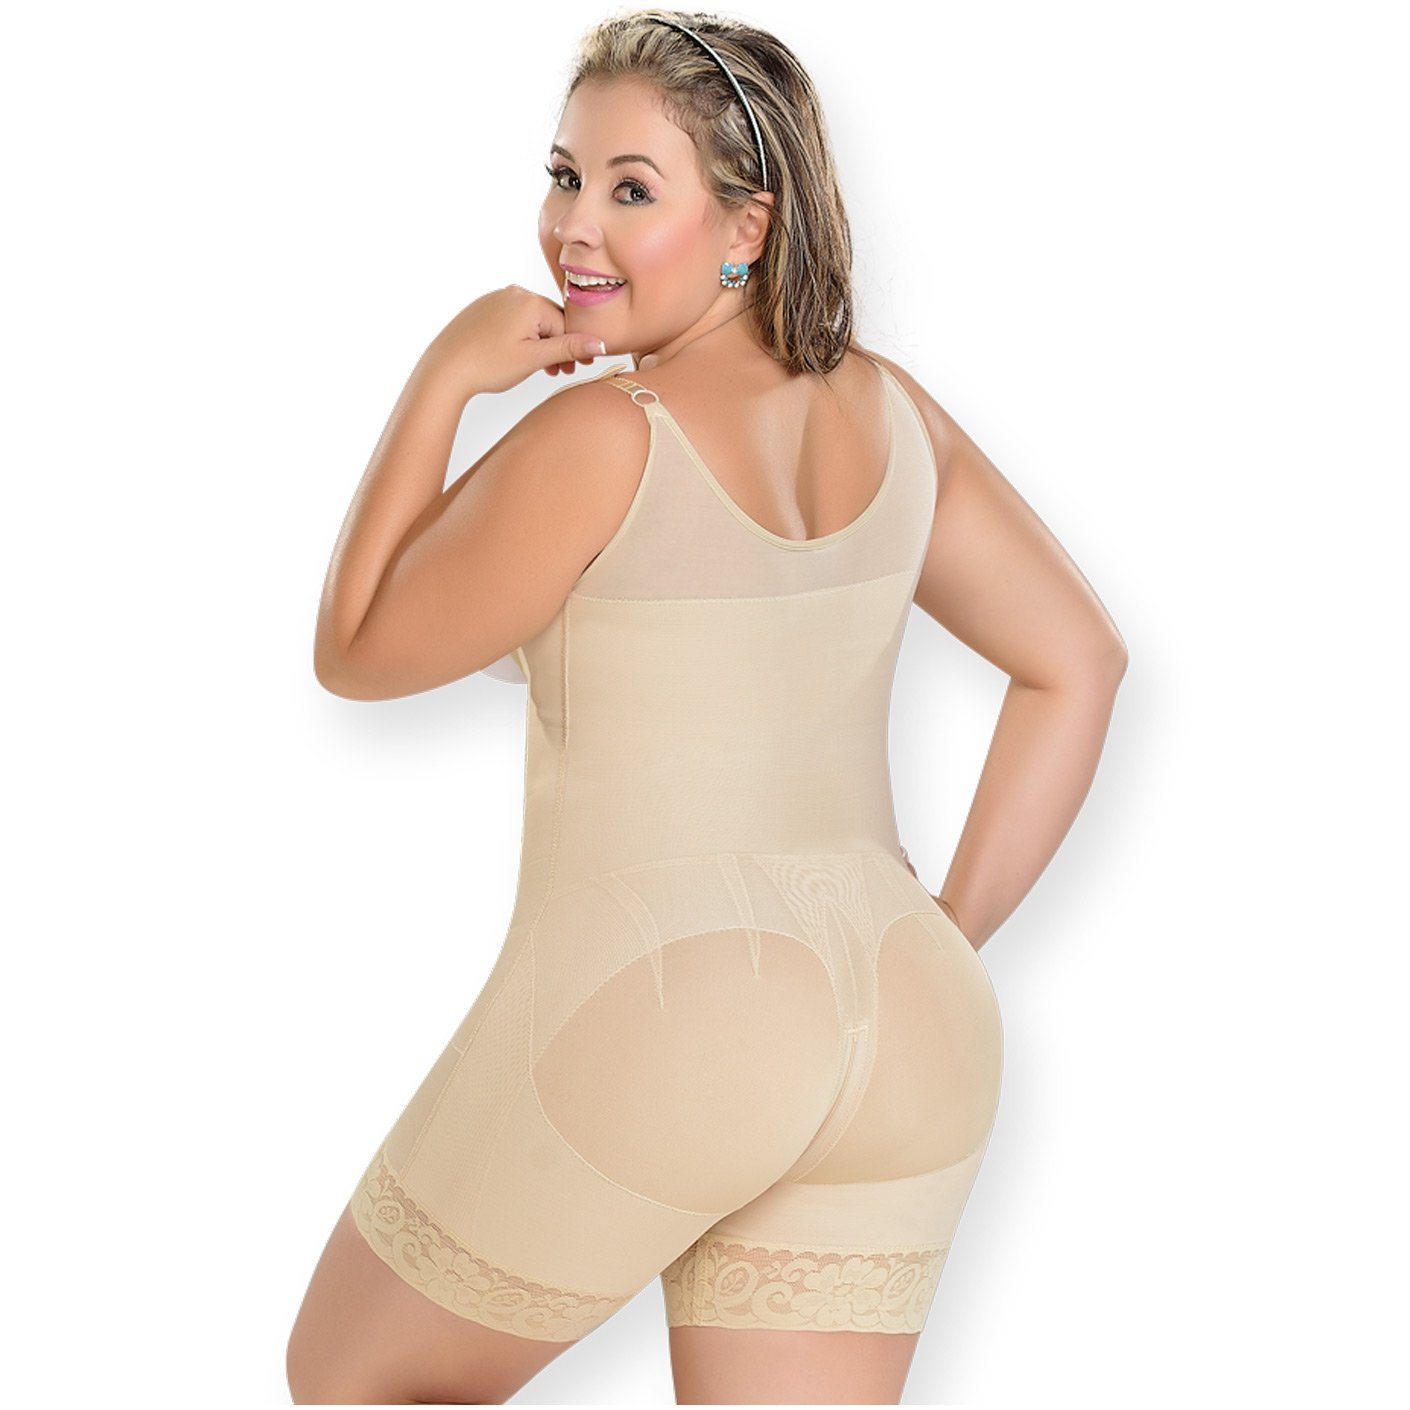 M&D 0068 Slimming Mid Thigh Body Shaper - New England Supplier